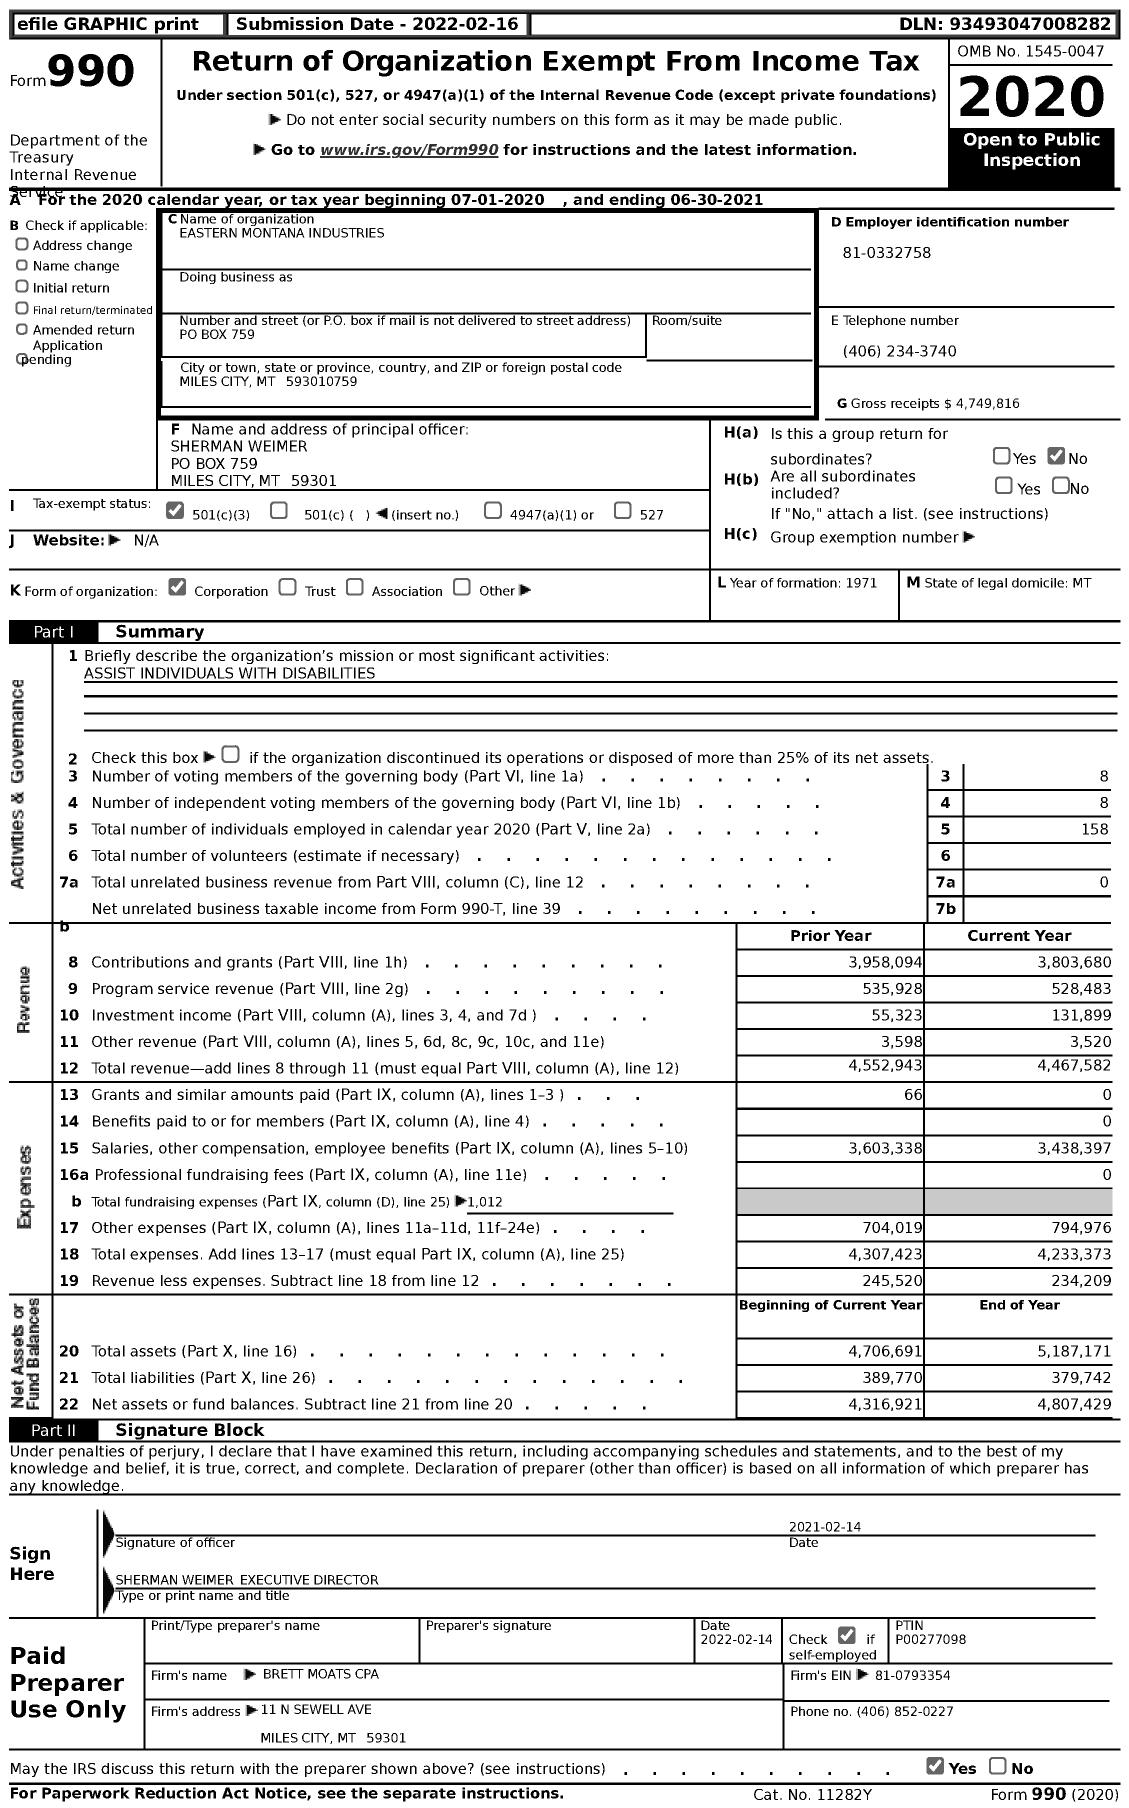 Image of first page of 2020 Form 990 for Eastern Montana Industries